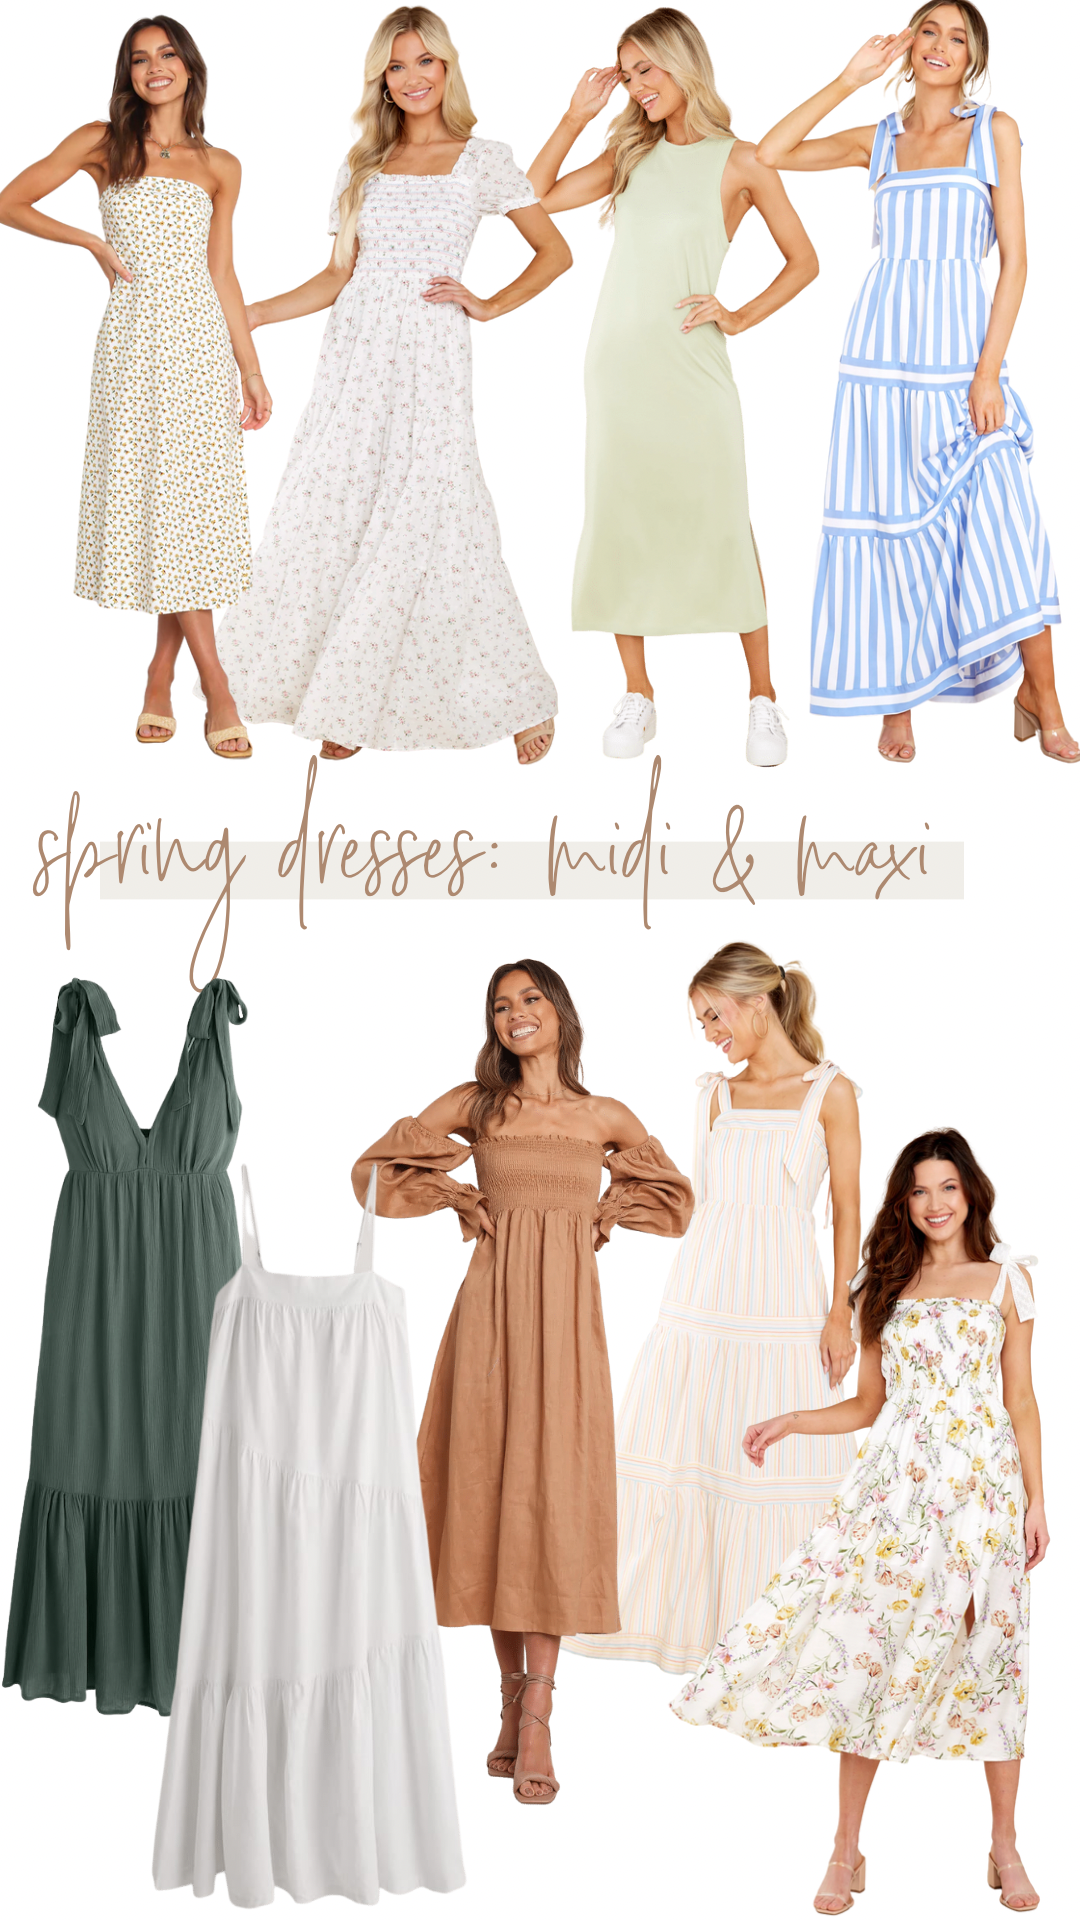 midi and maxi dresses for spring